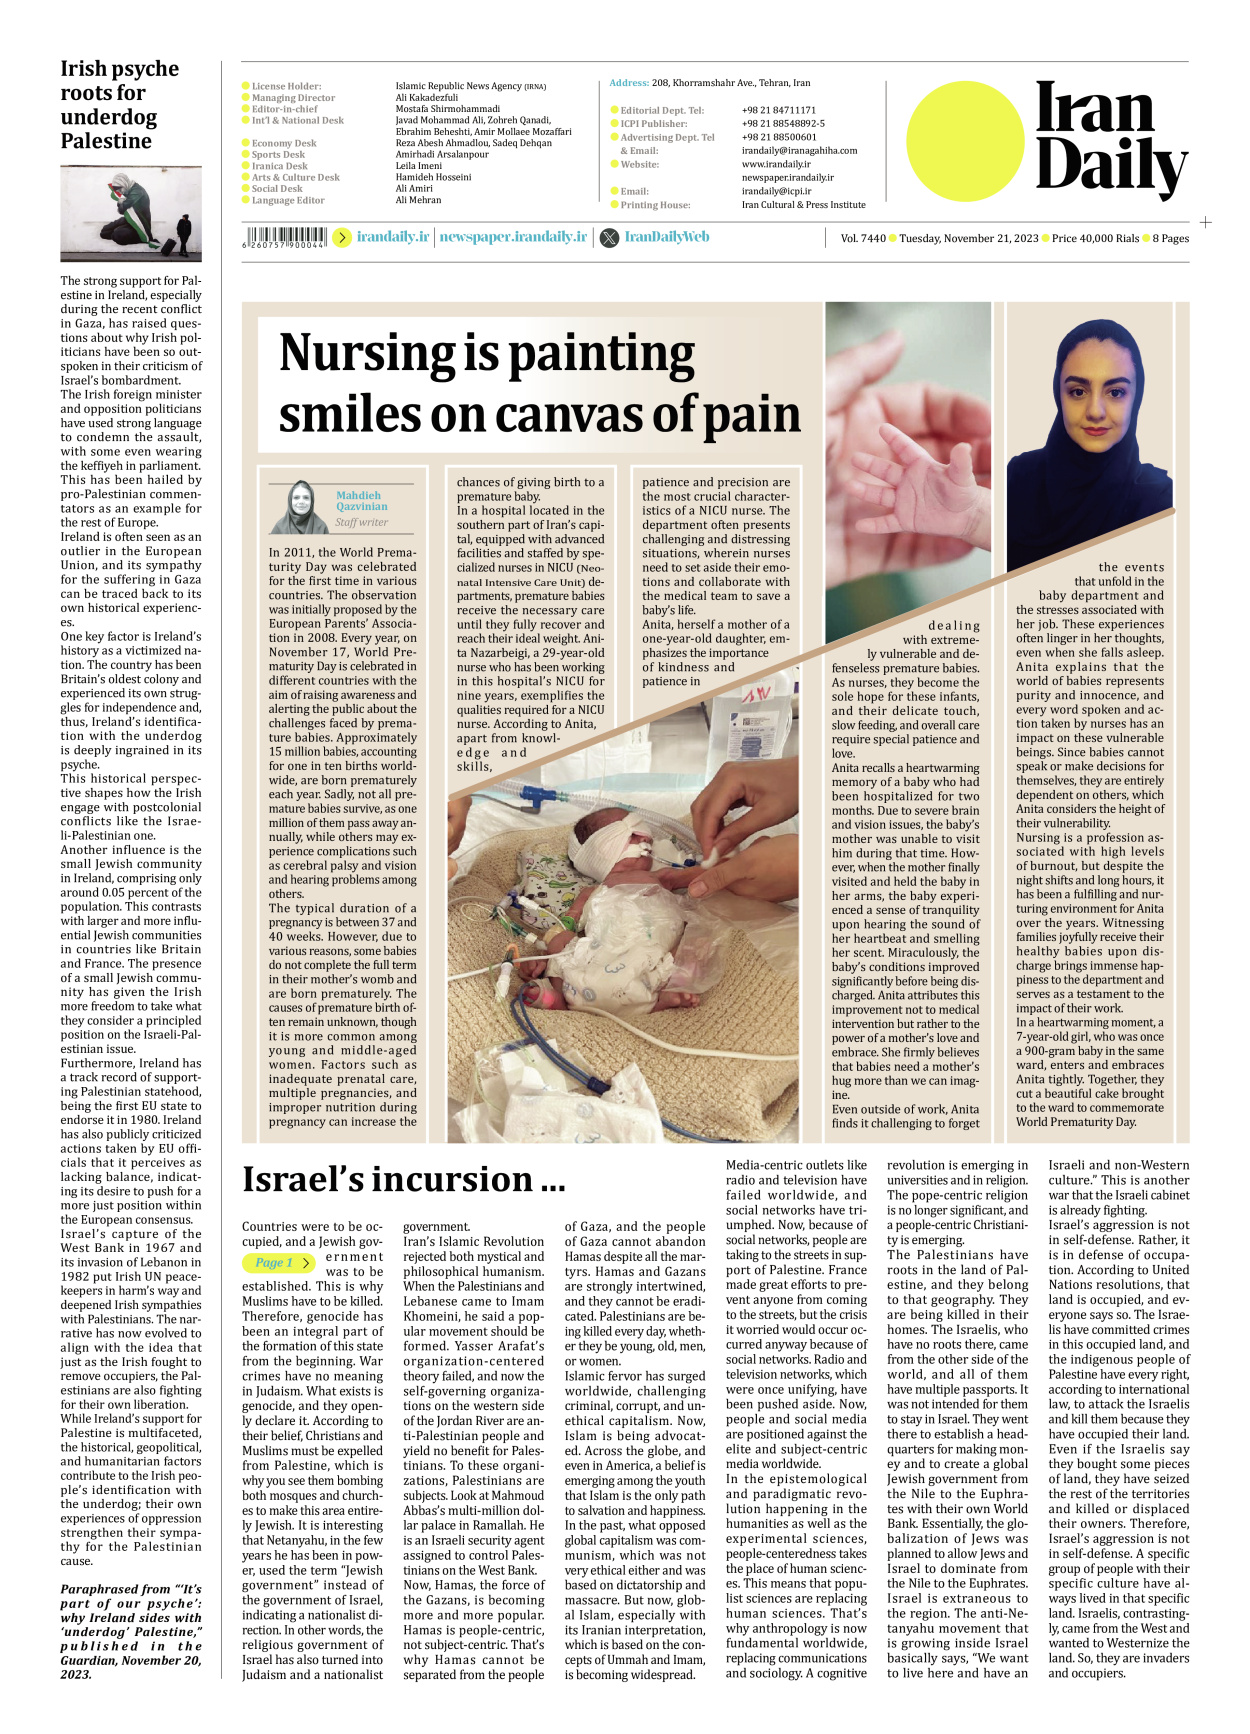 Iran Daily - Number Seven Thousand Four Hundred and Forty - 21 November 2023 - Page 8